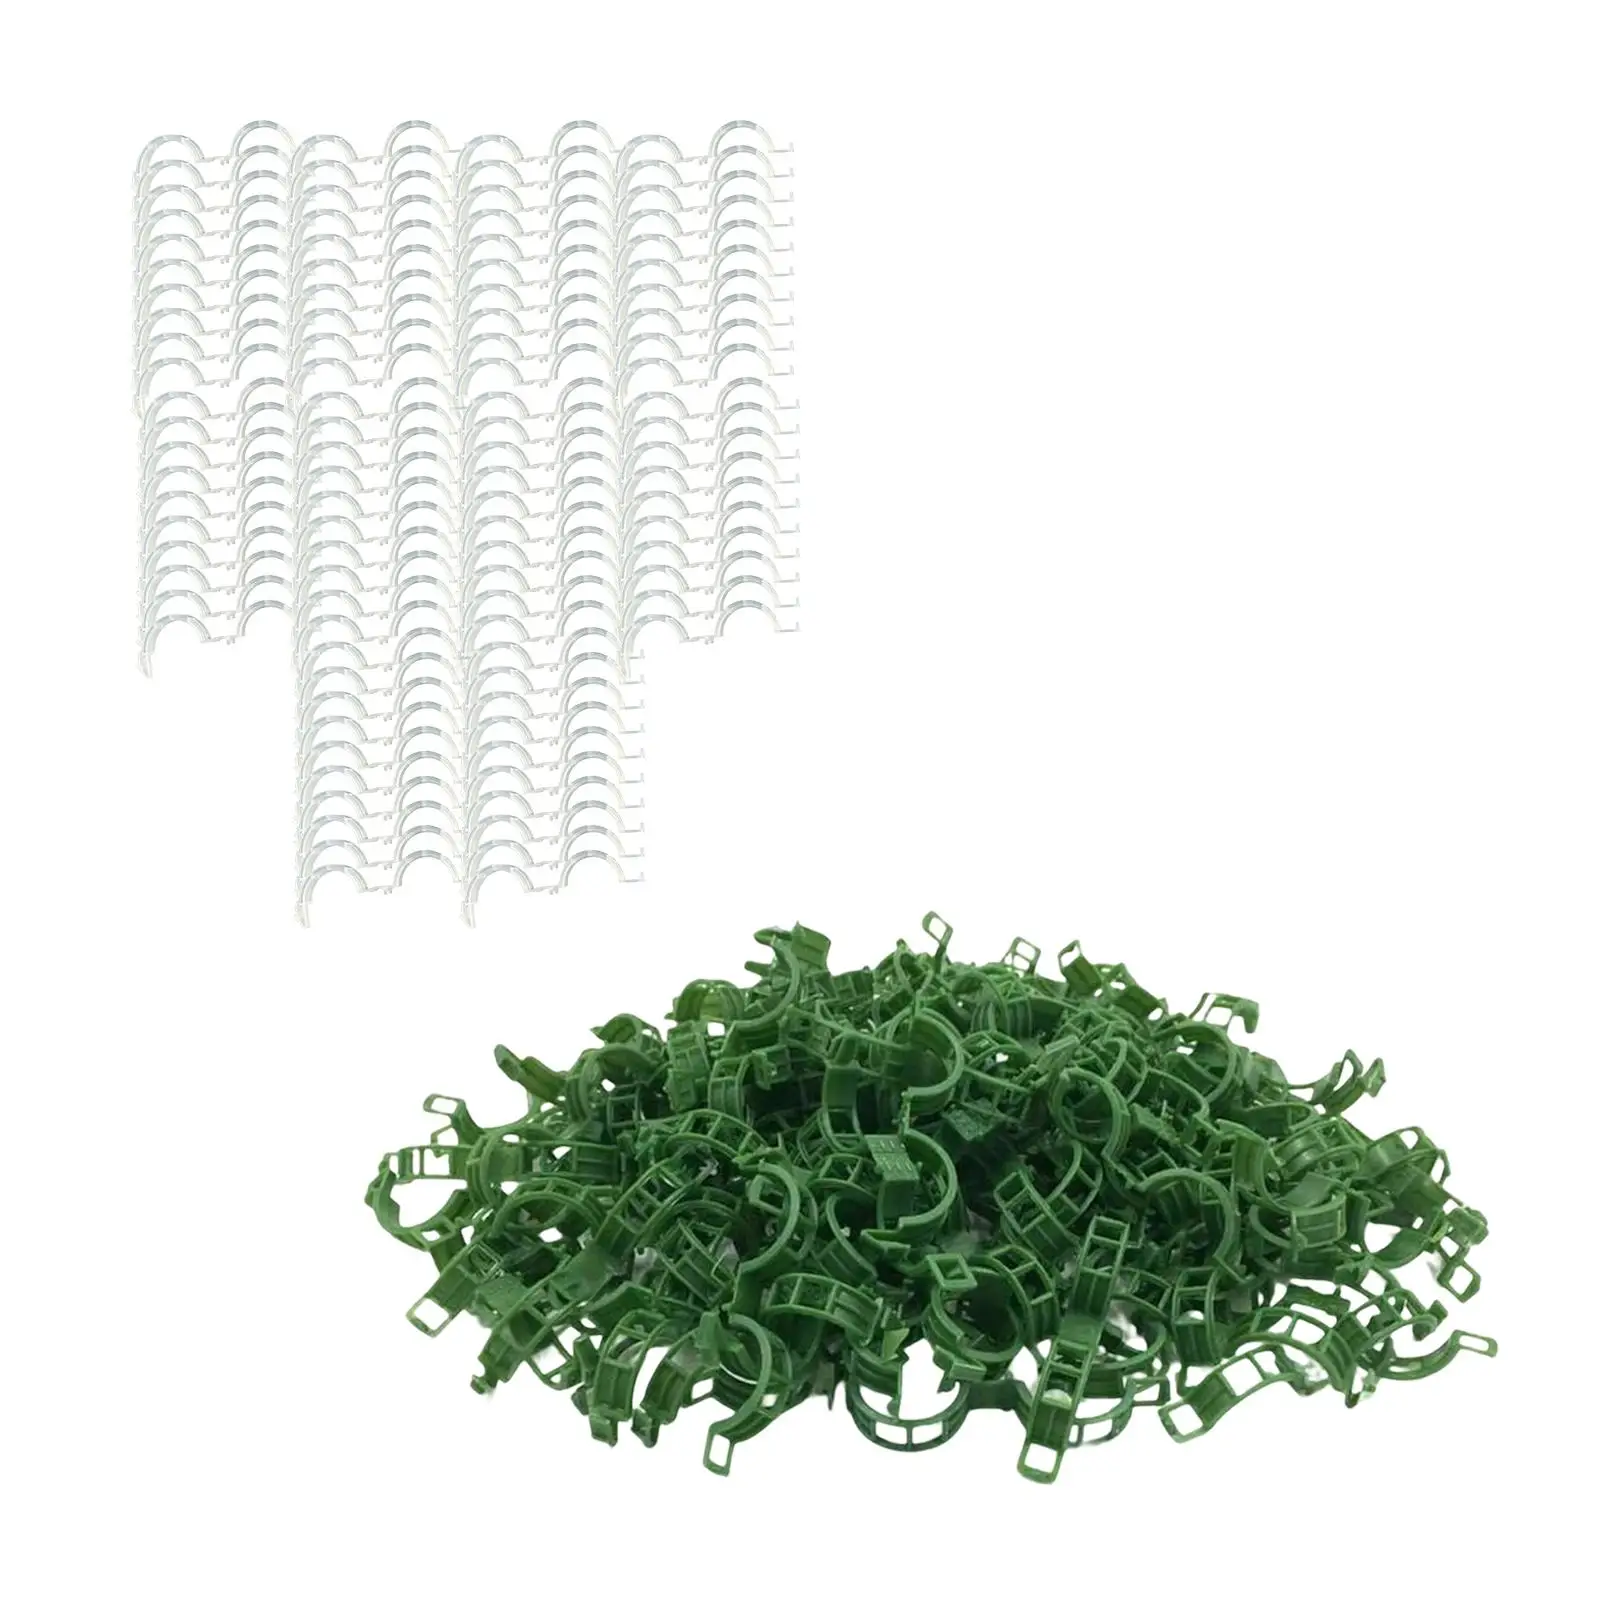 

100 Pieces Tomatoes Vine Clips Grow Upright Vegetables Flower Garden Clips for Tomatoes for Orchid Climbing Plants Greenhouse